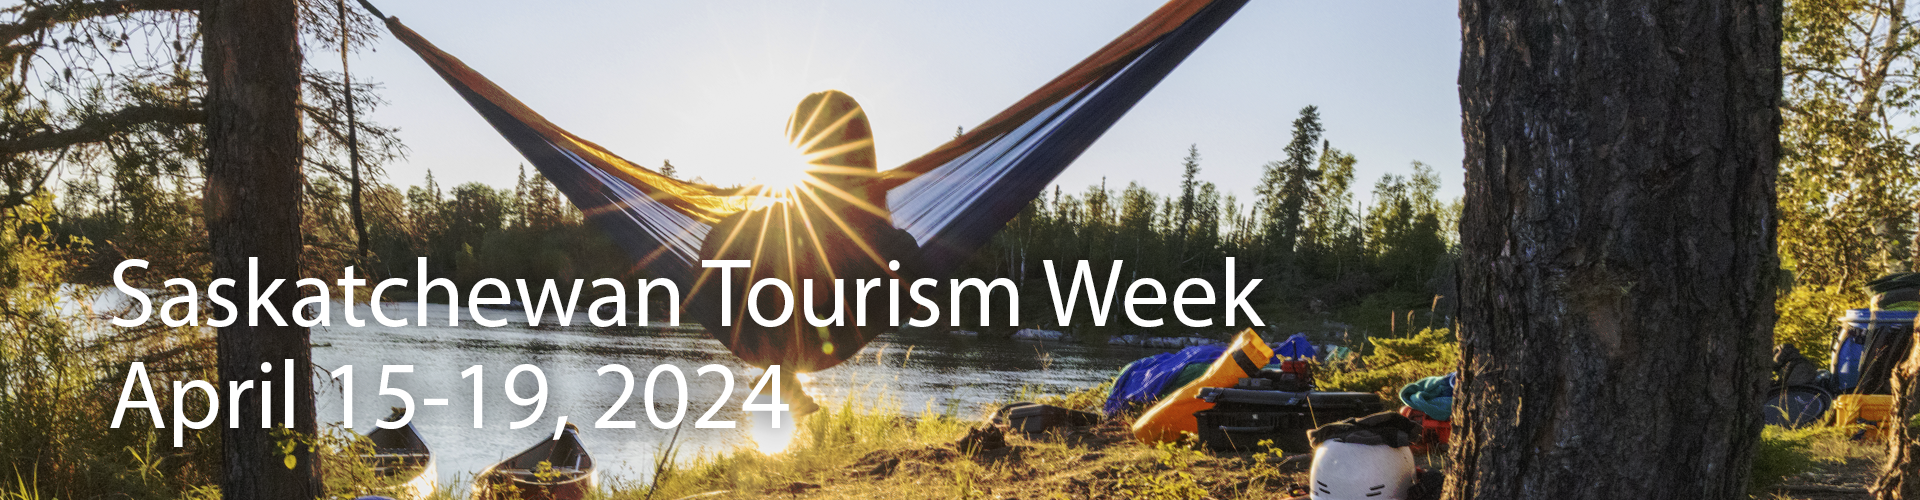 A person in a hammock with a lake in the background. The copy reads "Saskatchewan Tourism Week, April 15-19, 2024."